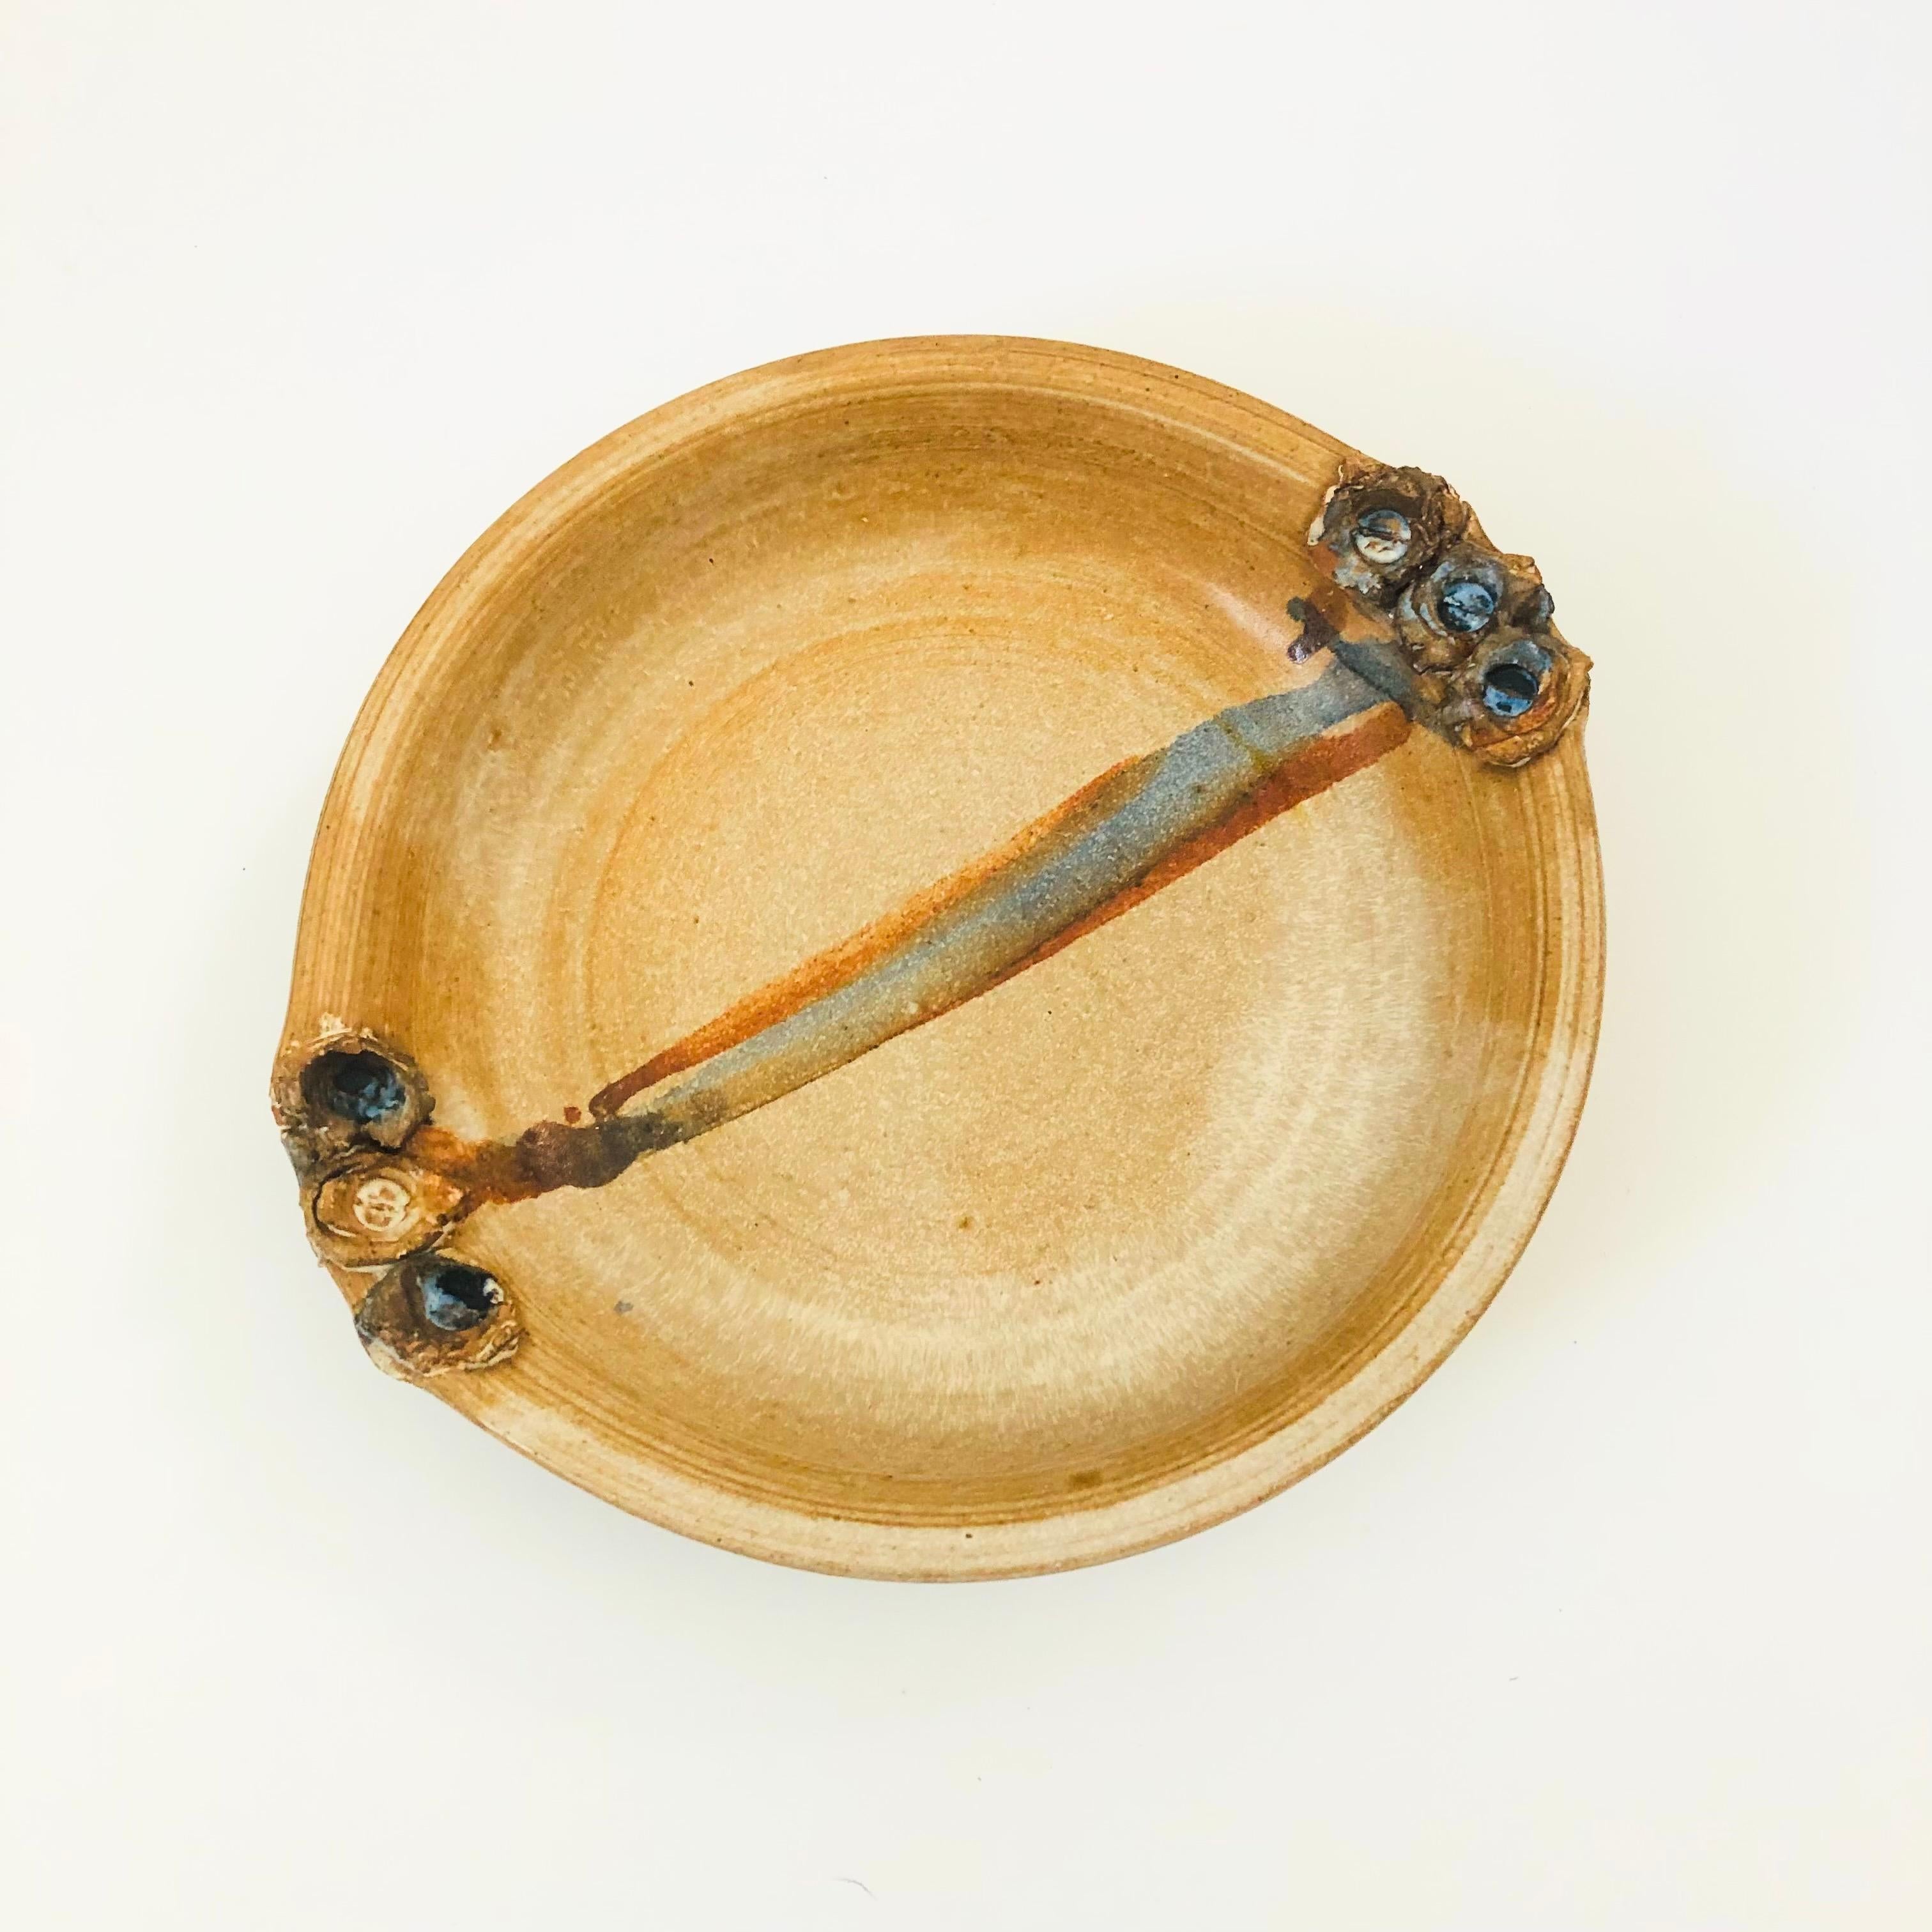 A vintage circular studio pottery tray. Earthy glazes with unique textured handles on the sides. A stripe of contrasting blue and brown glazes connects the 2 handles. Embossed signature of the maker on the side.

